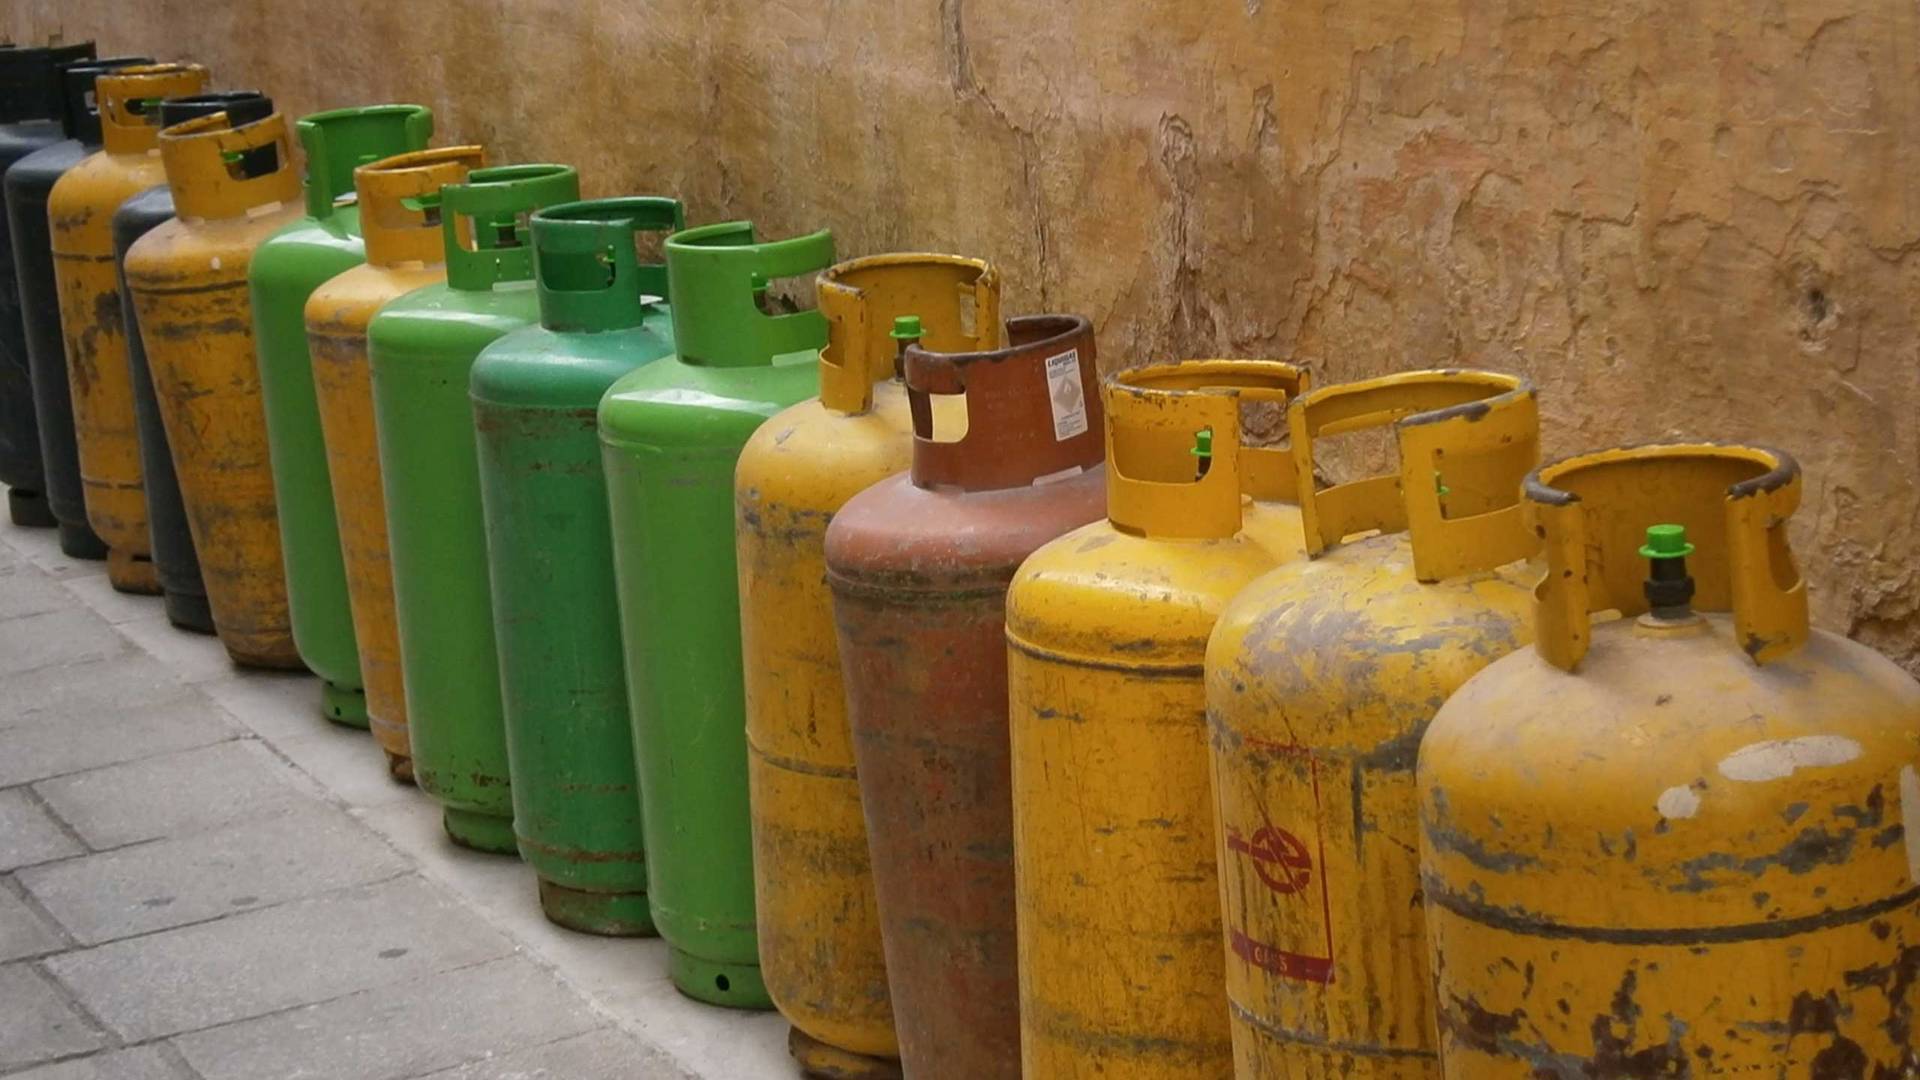 LPG cylinders lined up against a wall